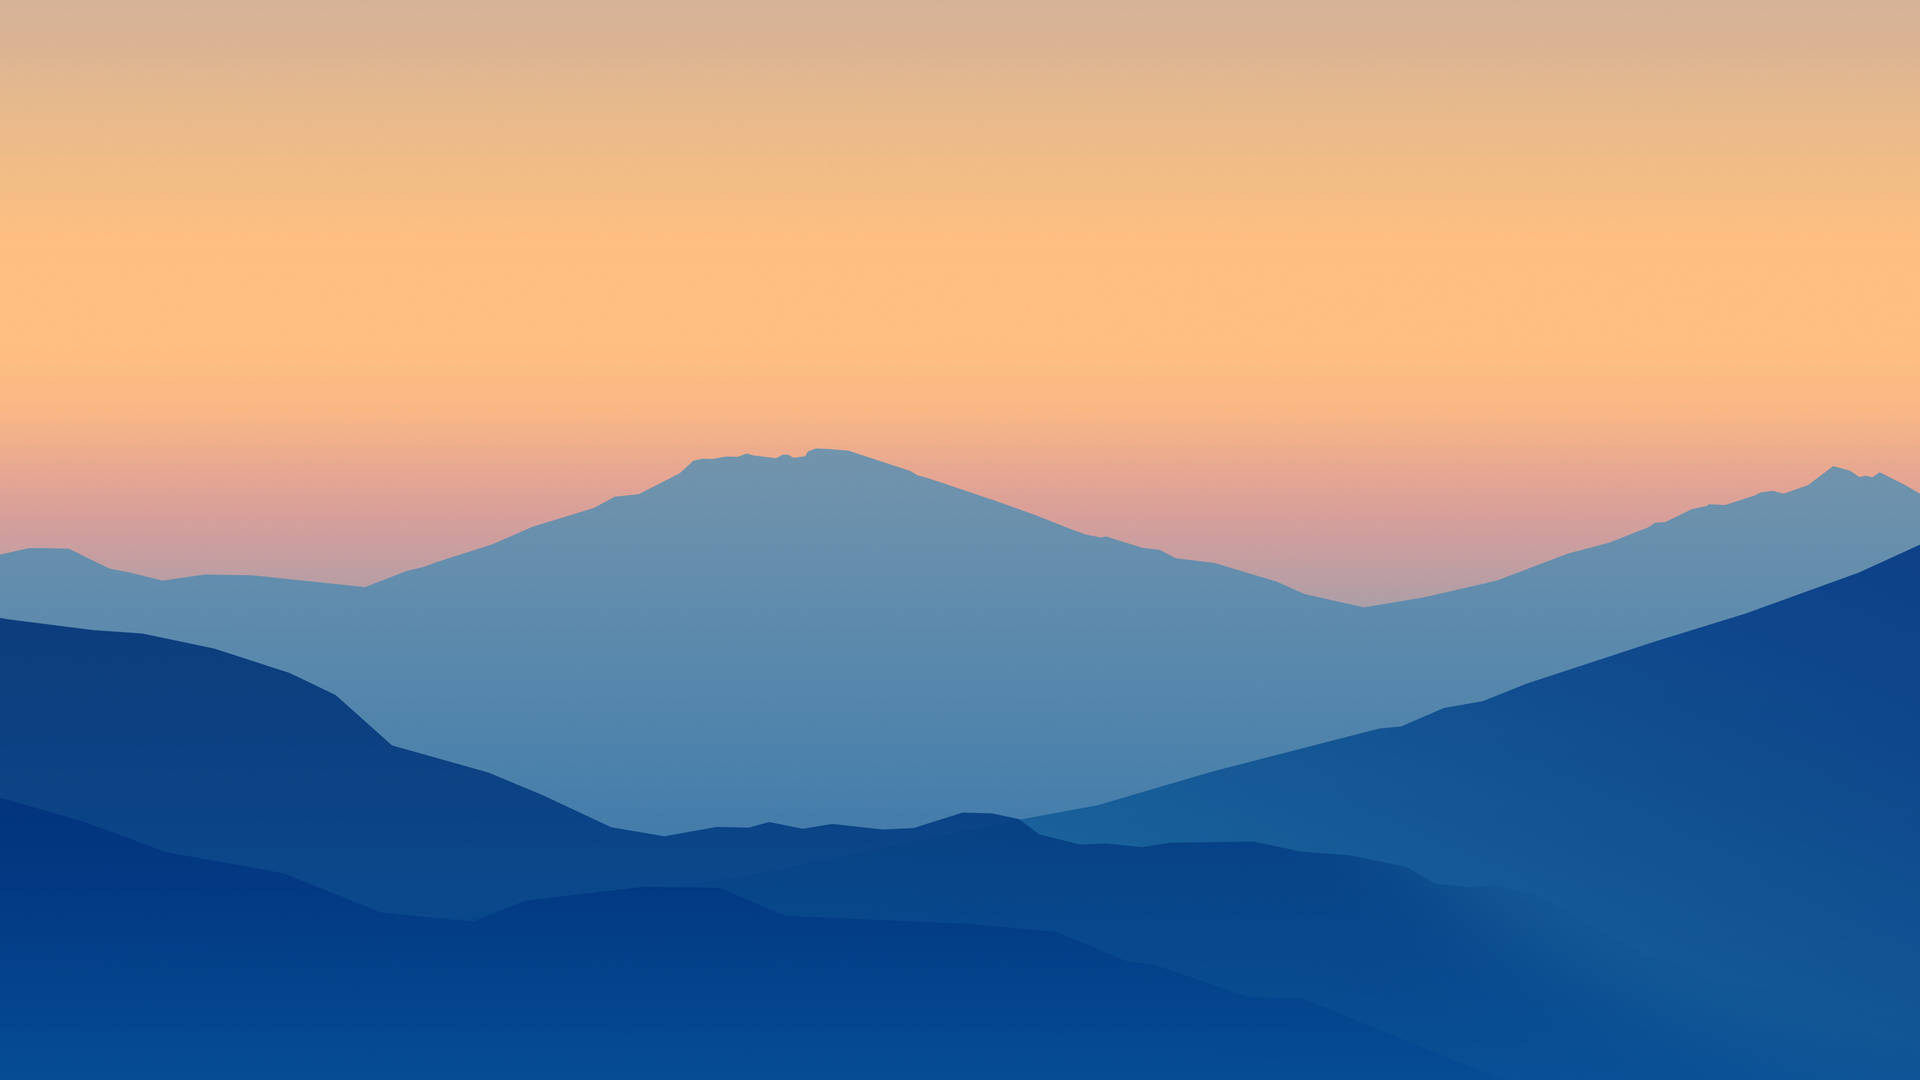 Nature's beauty - a colorful minimalist vector art mountain Wallpaper